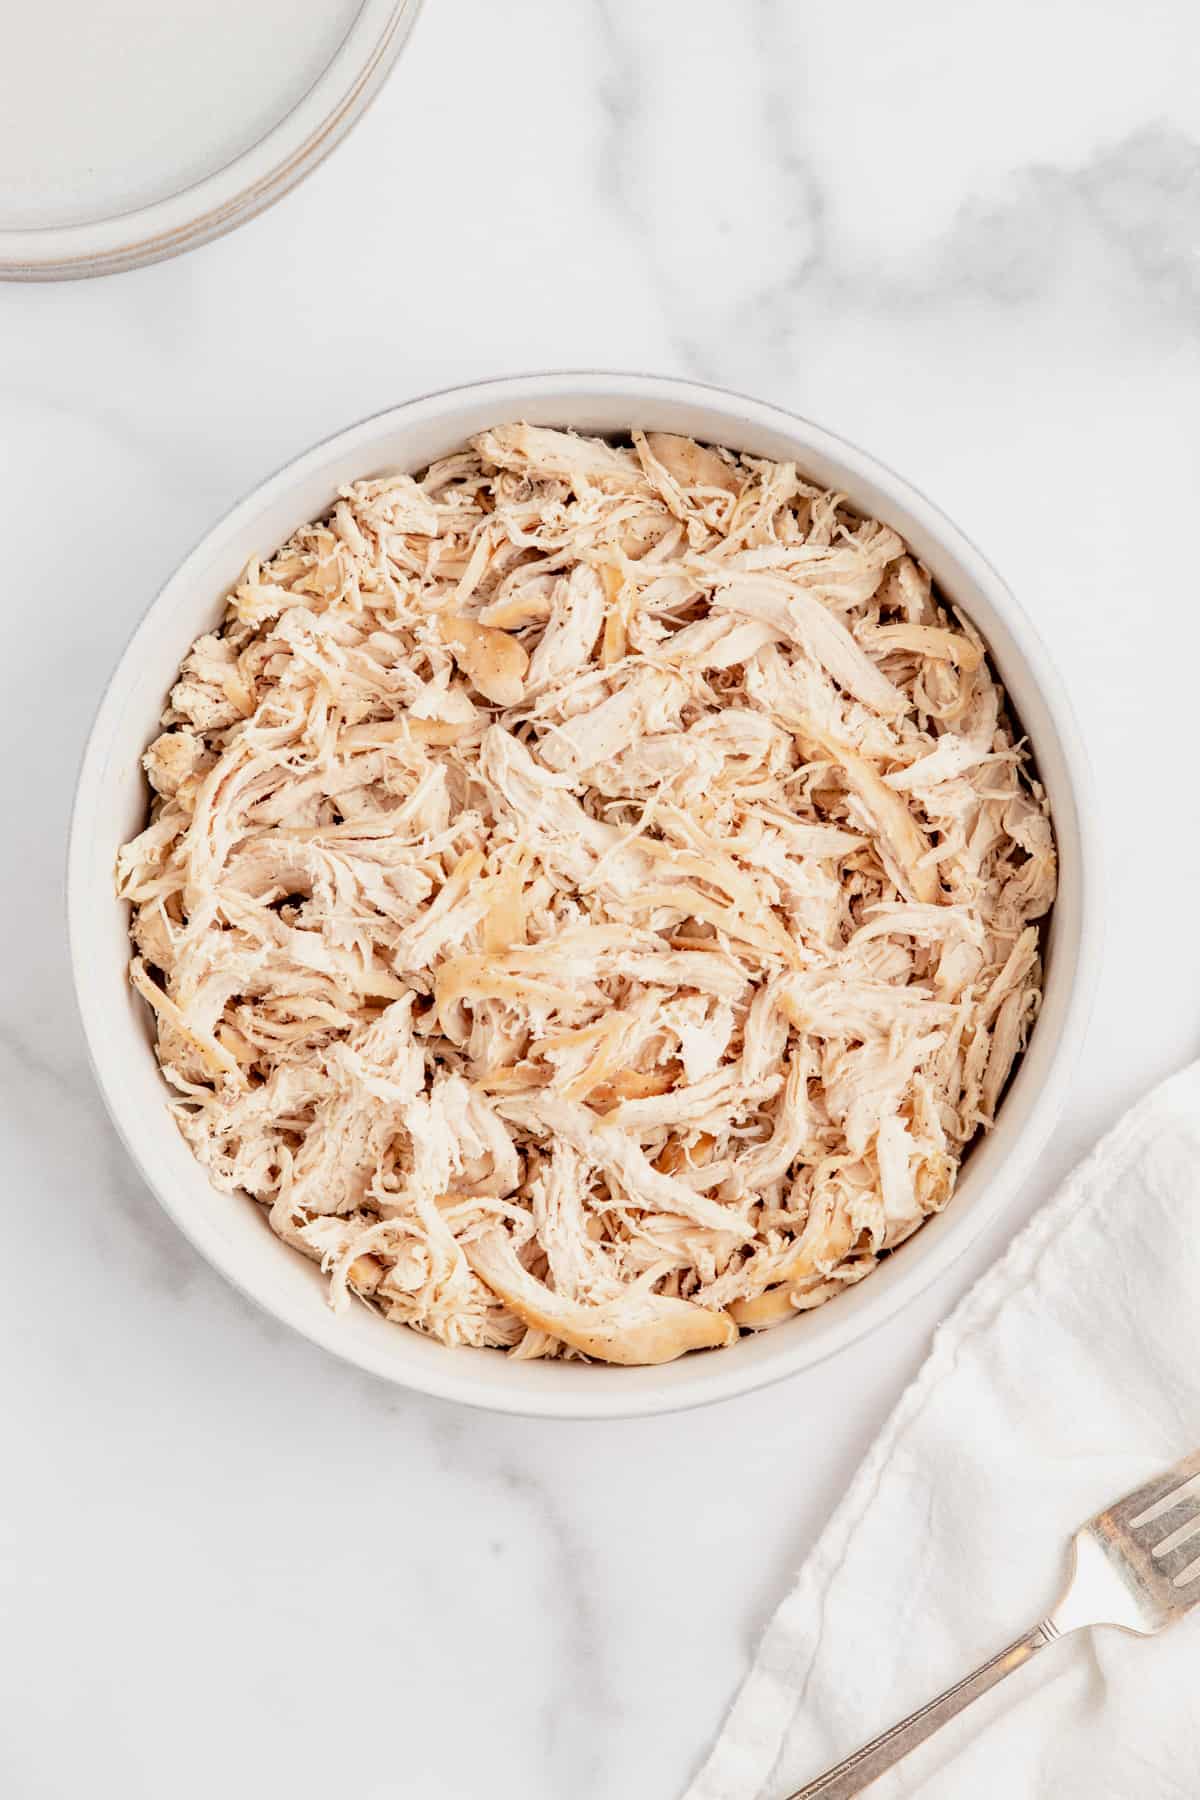 Shredded chicken in a bowl next to a fork.